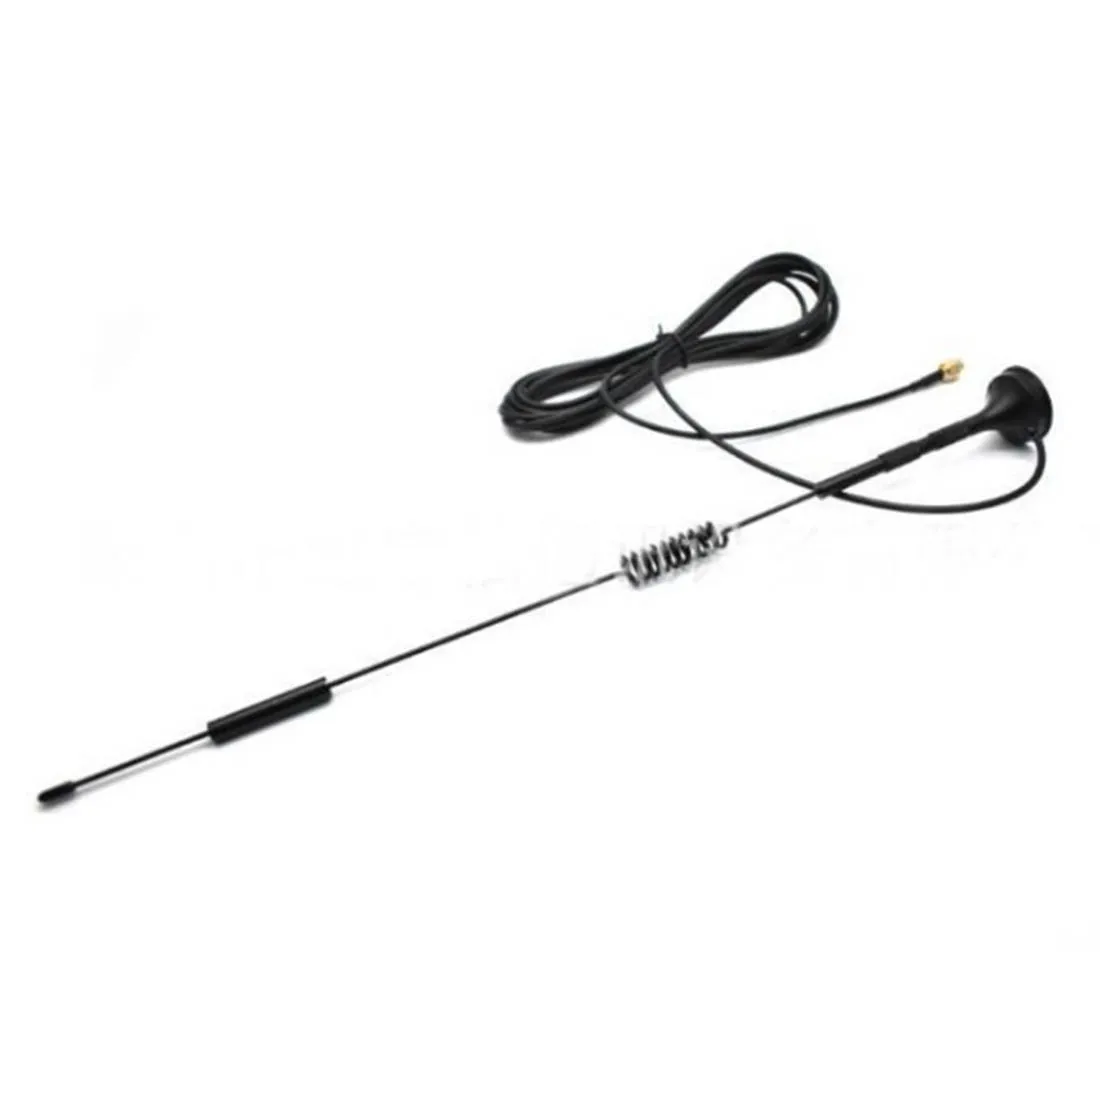 

4G10dbi Sucker Antenna 3m Cable with SMA Male Connector High Gain Aerial Supportable for CDMA GPRS GSM 2.4G WCDMA 3G New